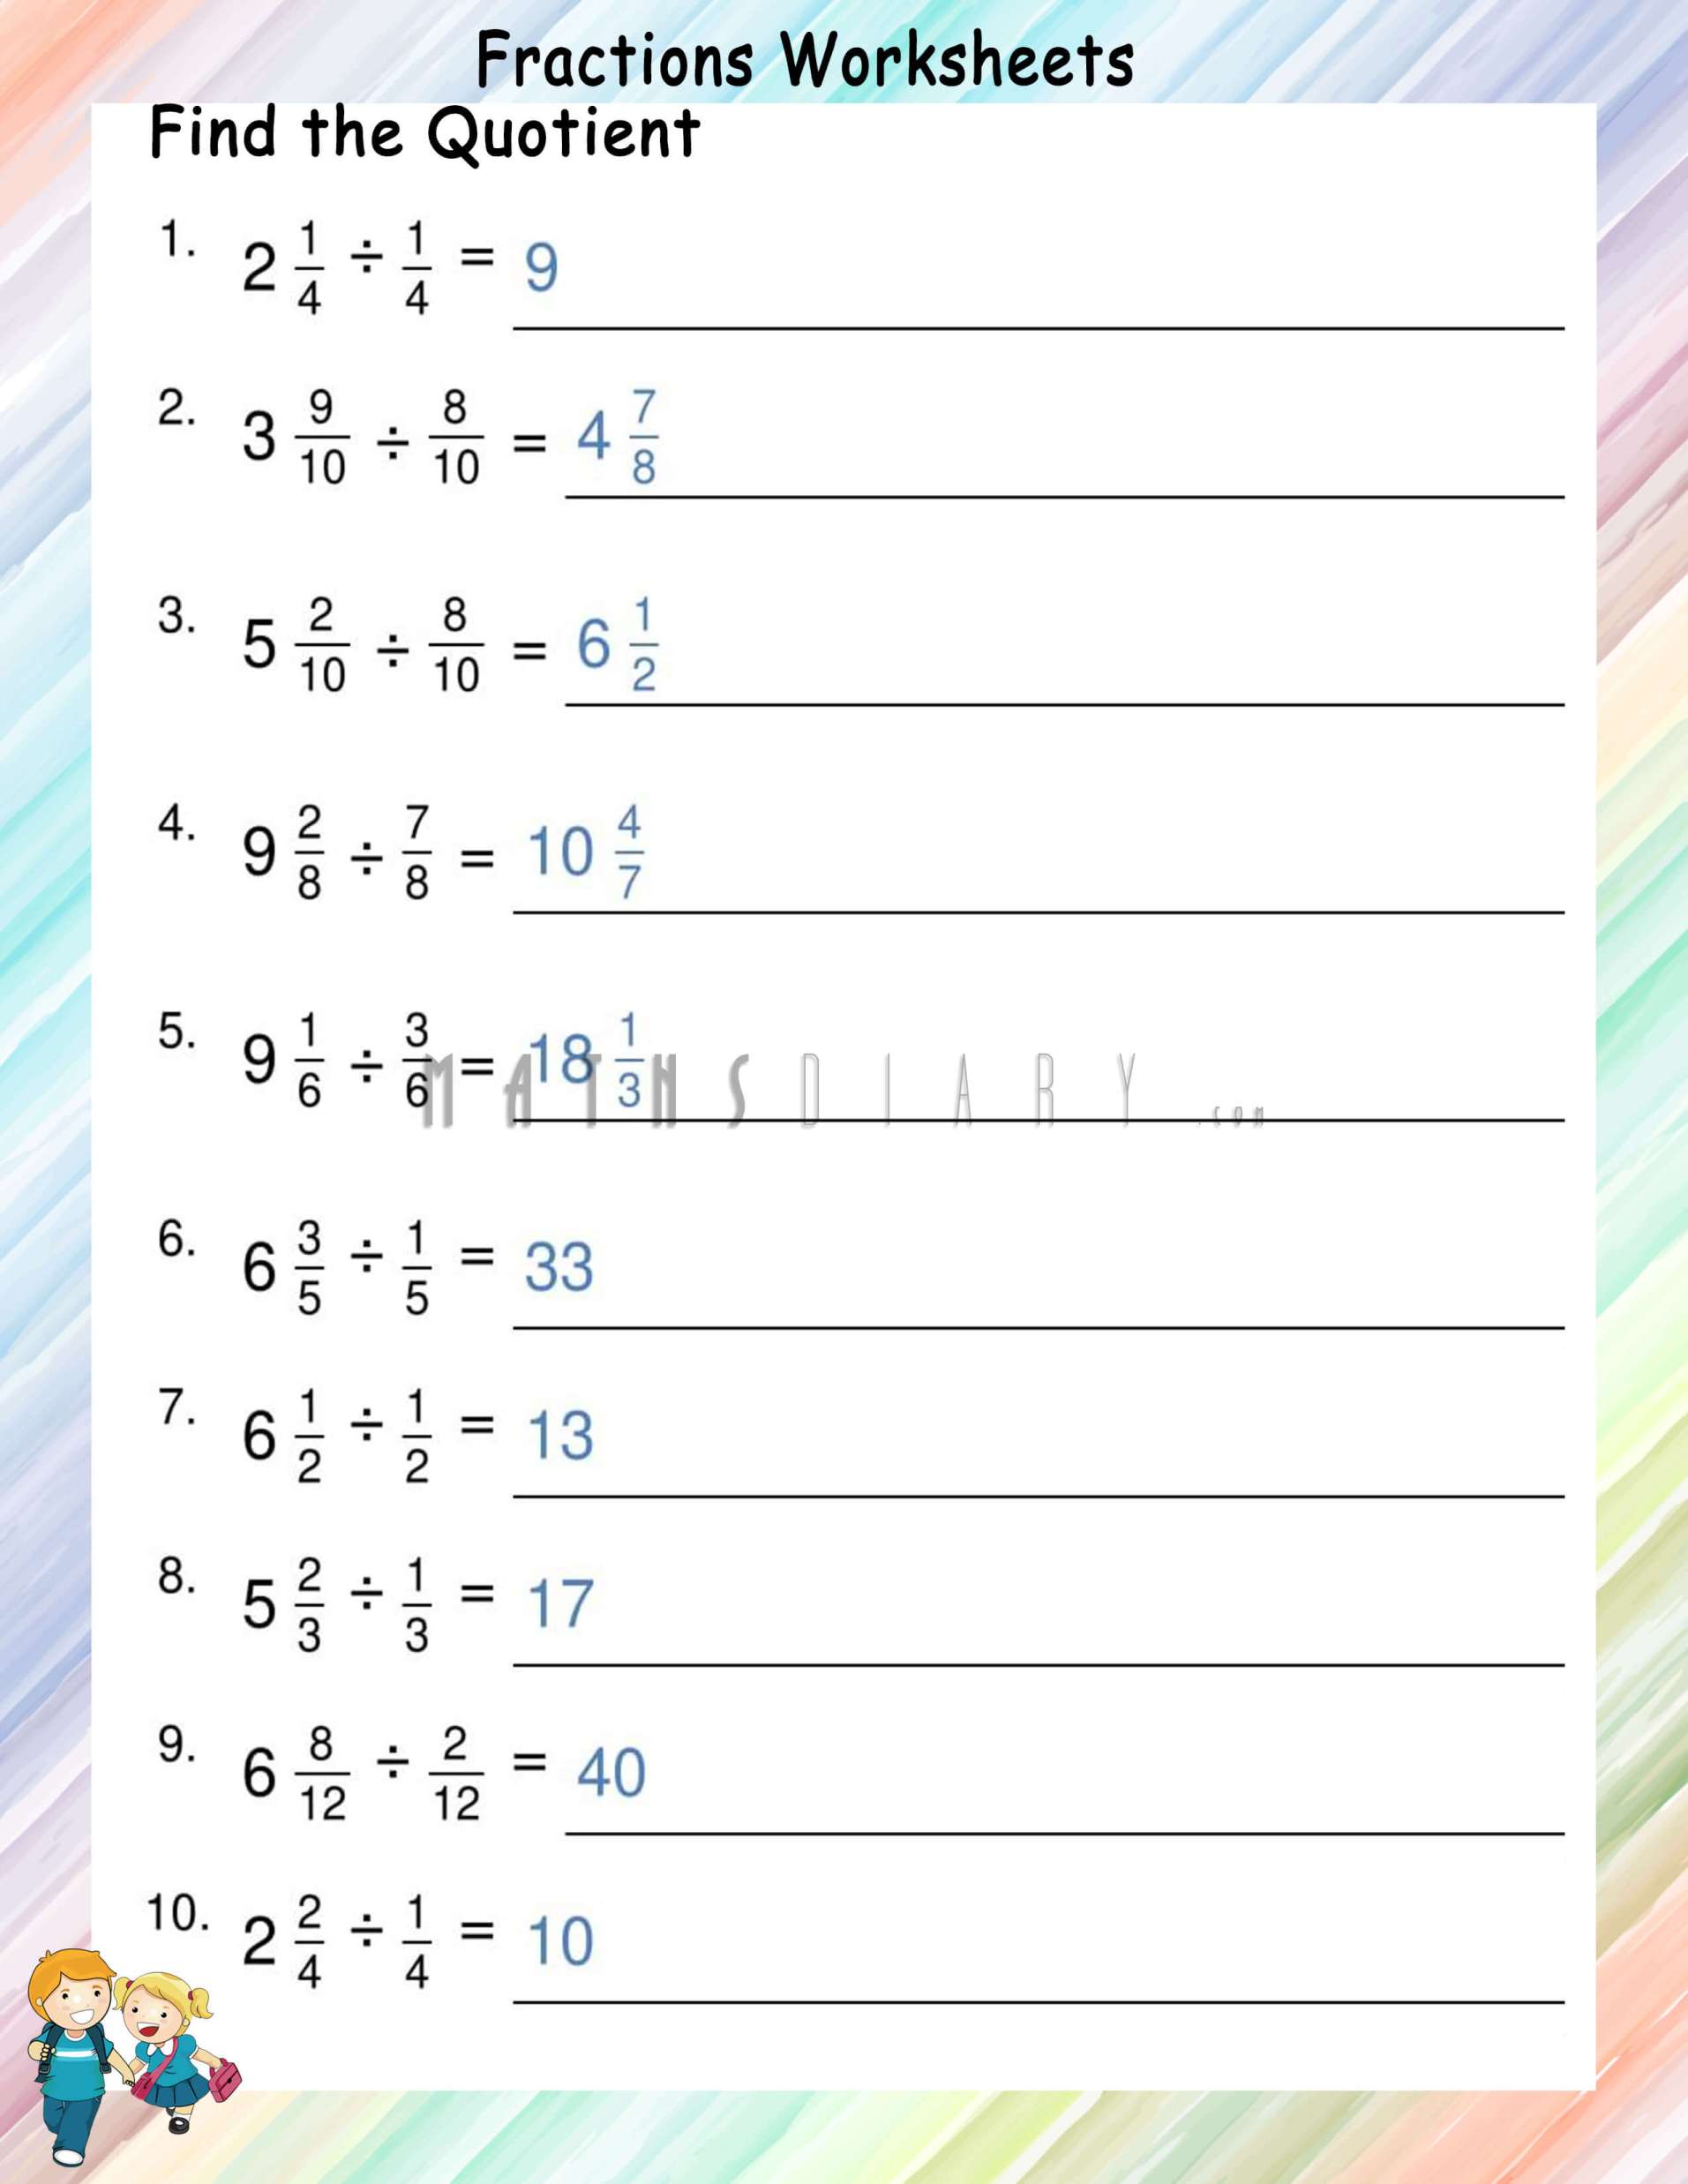 Division of mixed fractions by simple fractions- Worksheets - Math ...